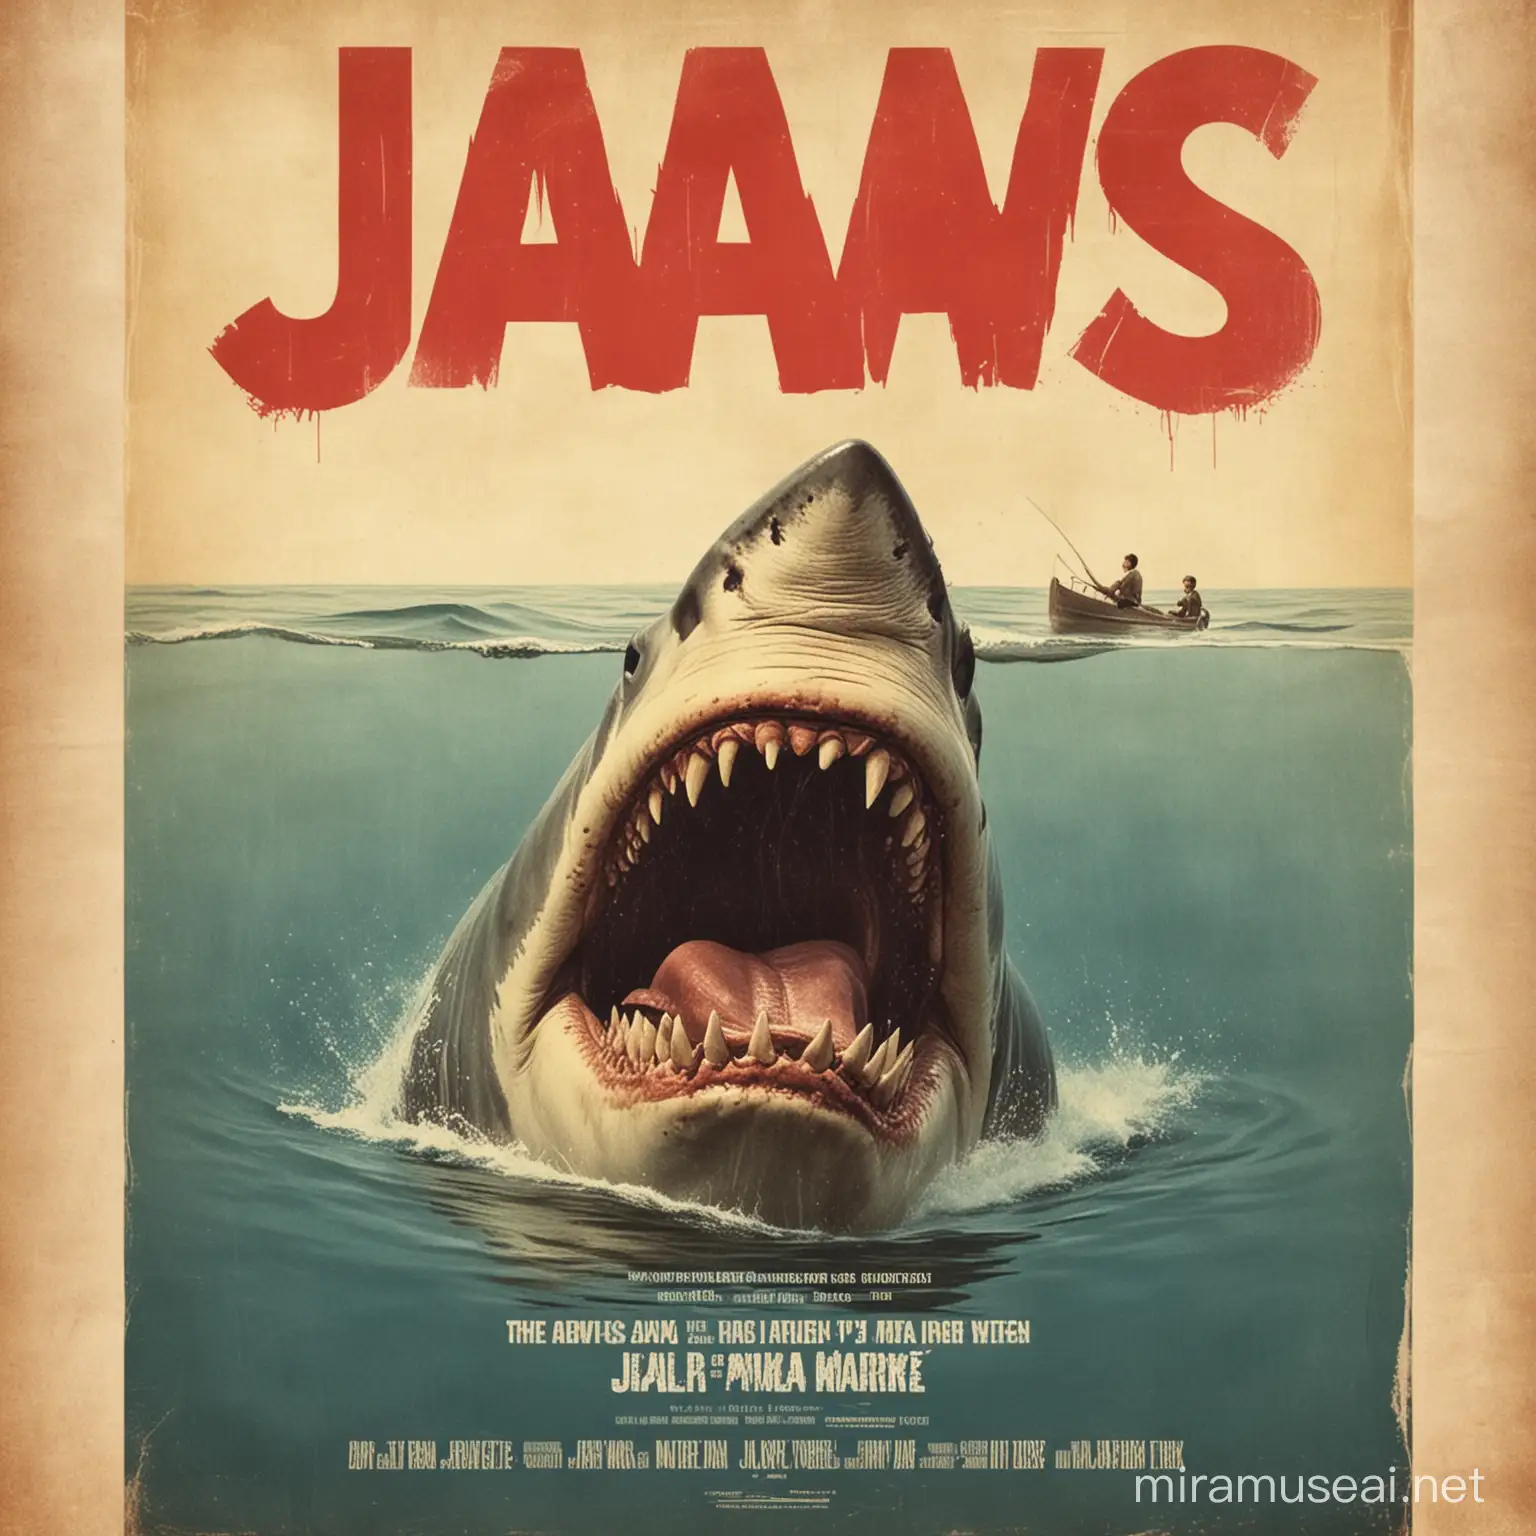 make old jaws movie poster with vintage look without text
